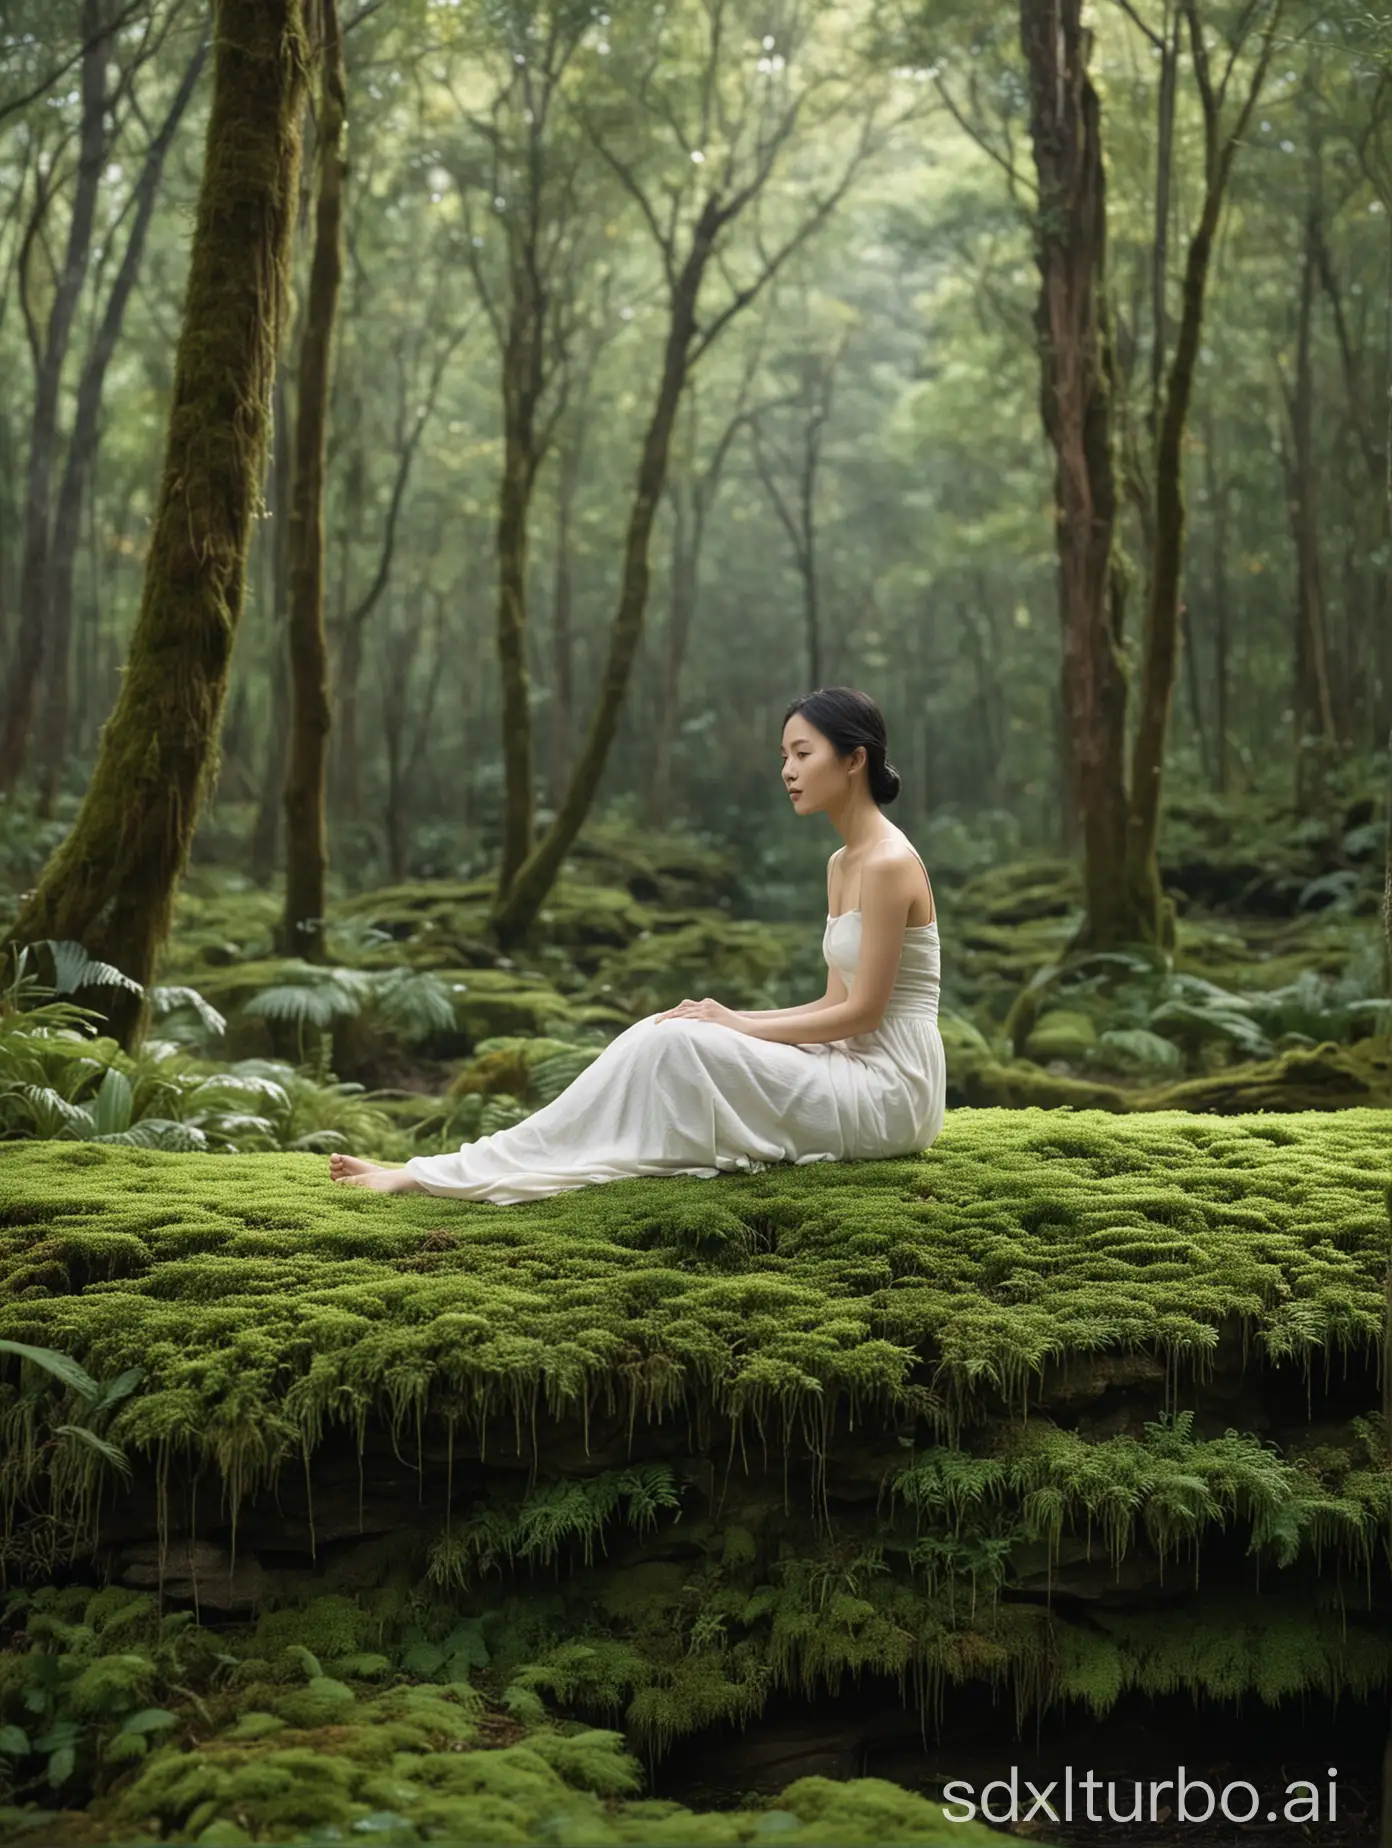 A serene scene featuring a fair-skinned Asian woman sitting in profile on a moss-covered platform. She has her hair neatly tied up in a bun and is wearing a loose, floor-length, cream-colored robe that drapes gracefully around her. The platform is thickly covered with lush, green moss, with some parts of the moss hanging down over the edges, giving it a natural and organic appearance.

The background consists of pale green walls with a soft gradient, creating a calming atmosphere. These walls are adorned with two large, overlapping circular decorations, adding a harmonious and balanced feel to the composition. The overall color scheme is dominated by shades of green and white, enhancing the tranquil and meditative ambiance of the scene.

The camera is positioned at a medium distance from the subject, capturing her entire figure and the surrounding platform in full view. The depth of field is shallow, keeping the woman and the moss-covered platform in sharp focus while slightly blurring the background. This effect draws attention to the woman and the intricate details of the moss, while the overlapping circular decorations in the background add depth and context without distracting from the main subject.

The woman's serene posture and the minimalist, nature-inspired setting suggest a moment of contemplation or meditation, evoking a sense of peace and inner calm.